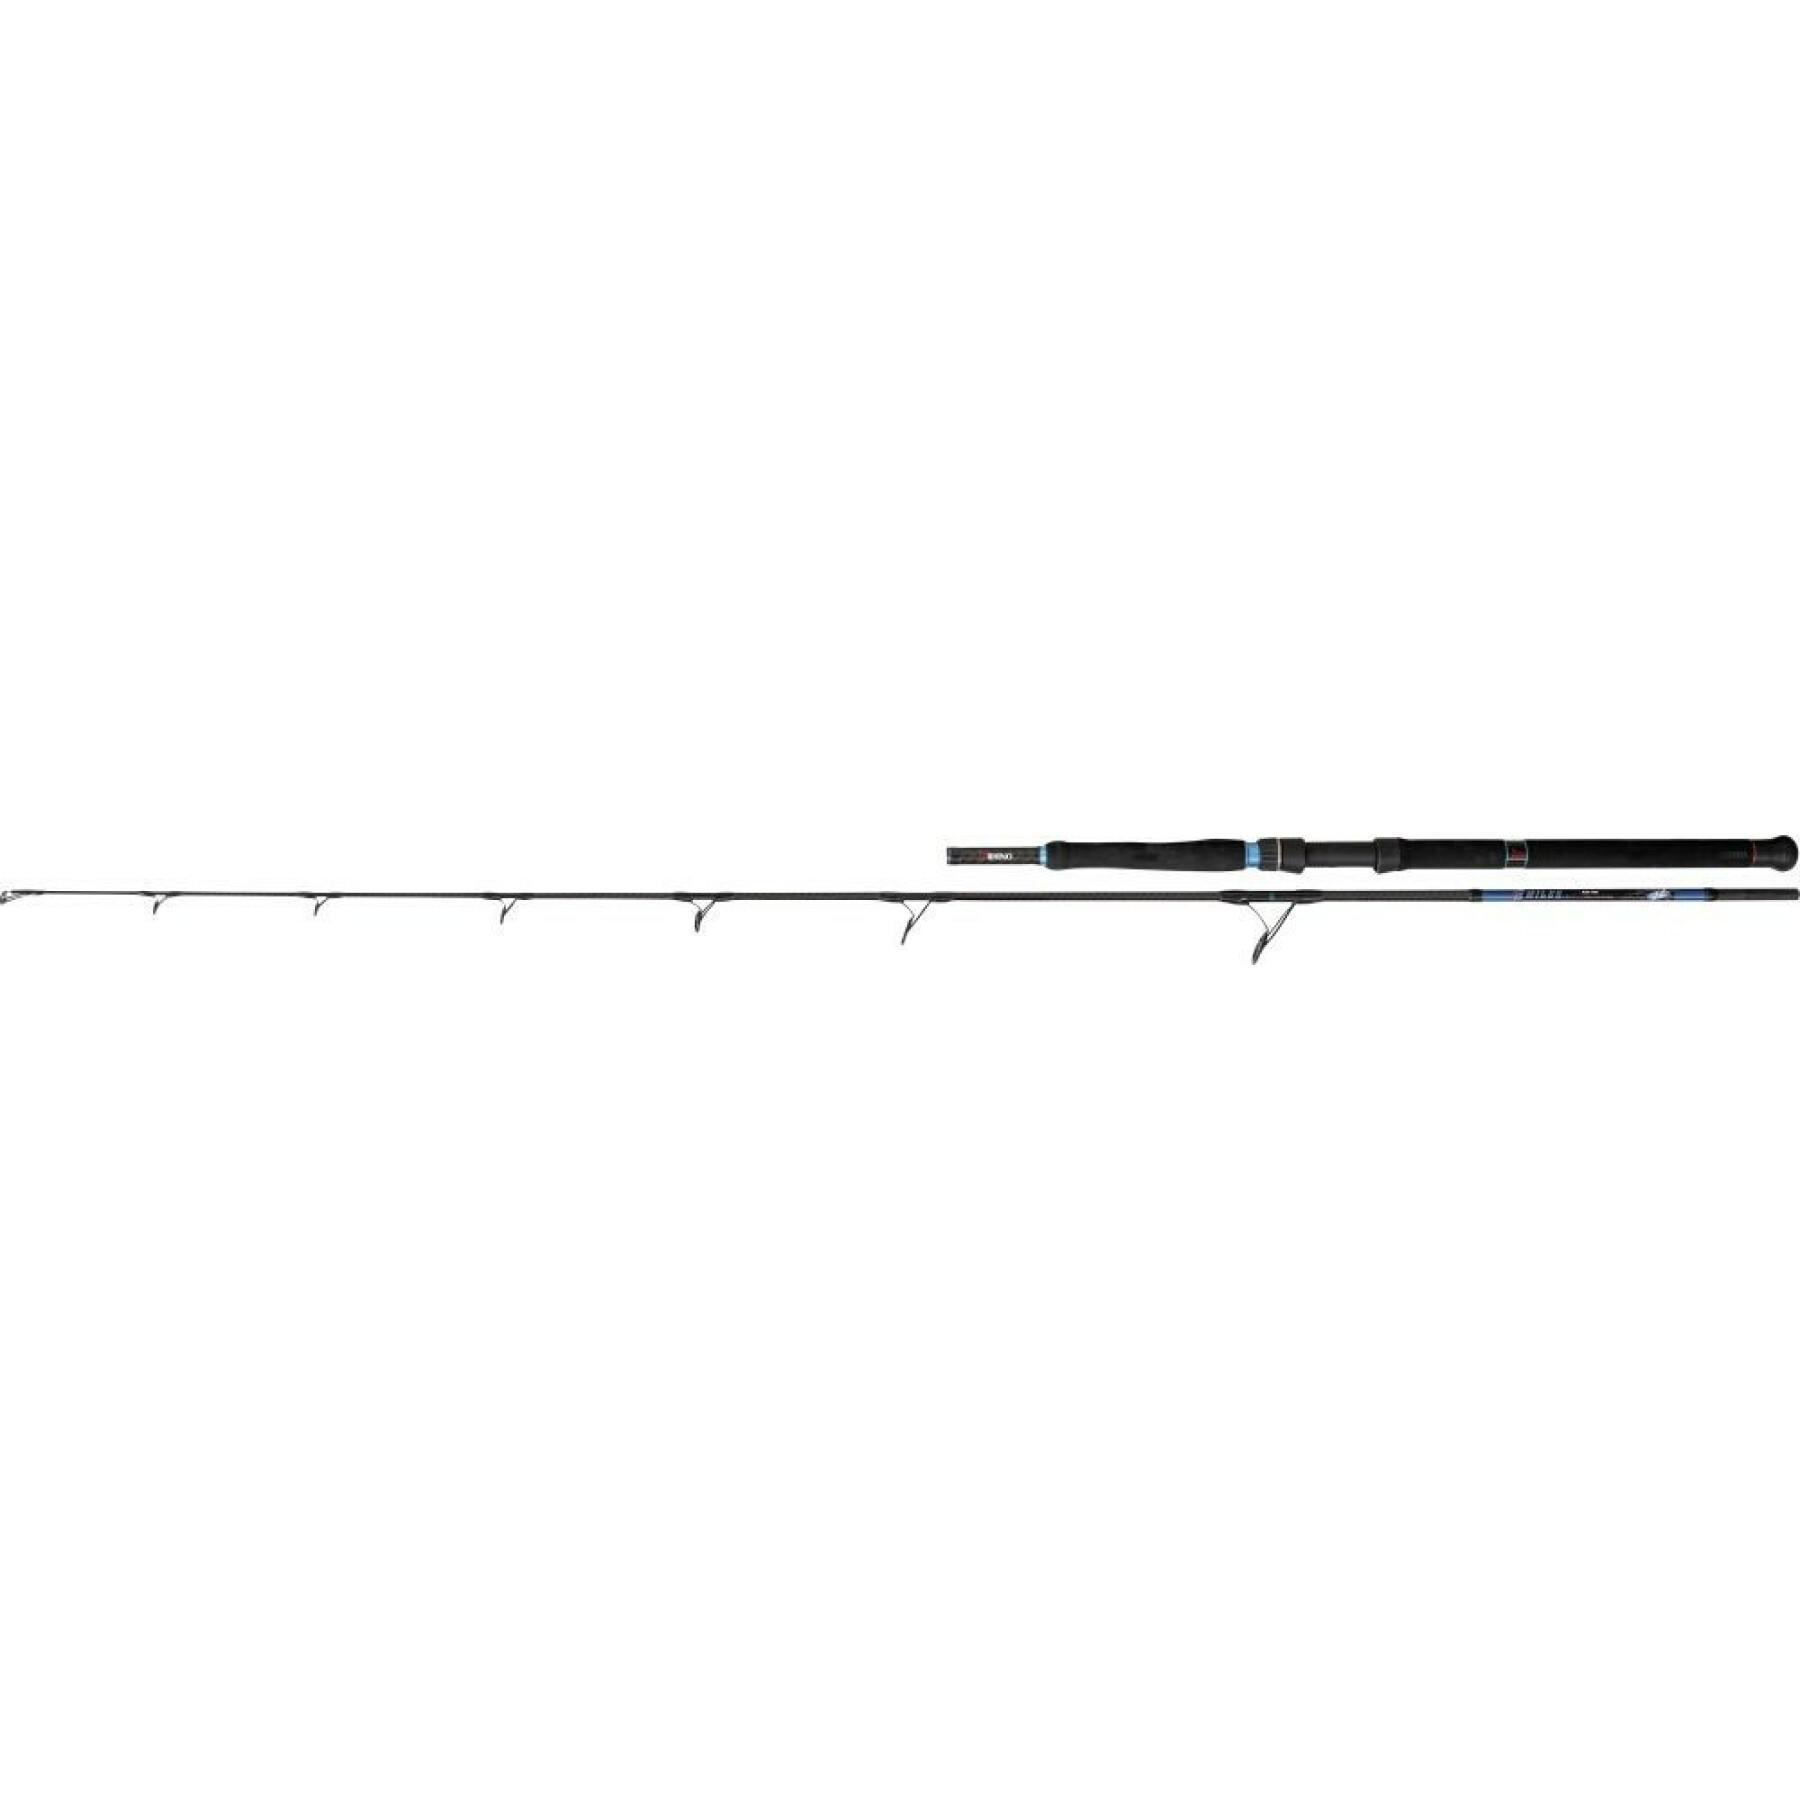 Gehstock Rhino 8 Miles Out Blue Fish 200-250g